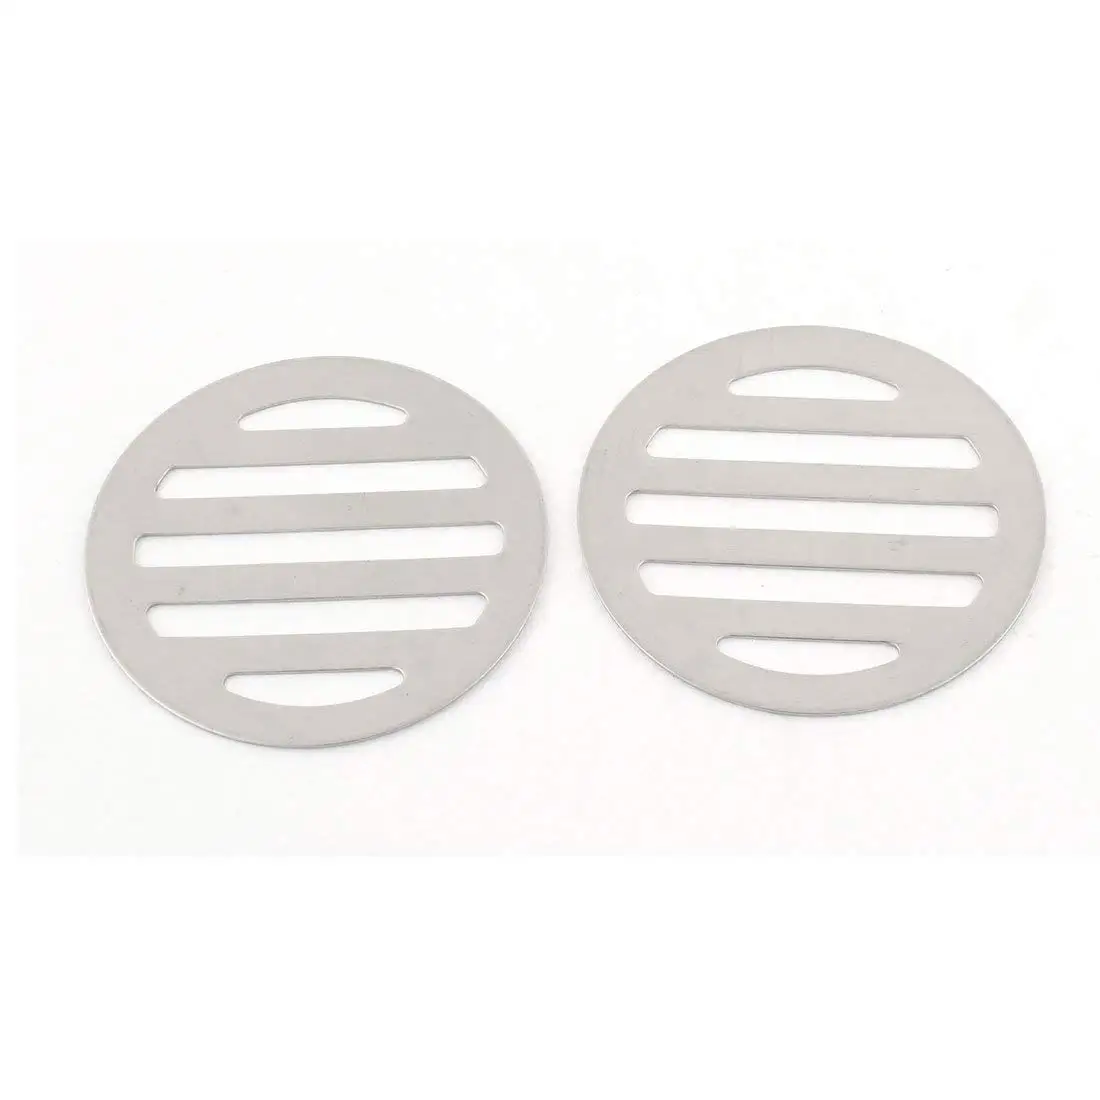 10 PACK Plastic Drain Cover 3 inch diameter /& 1//4 inch thick High Quality